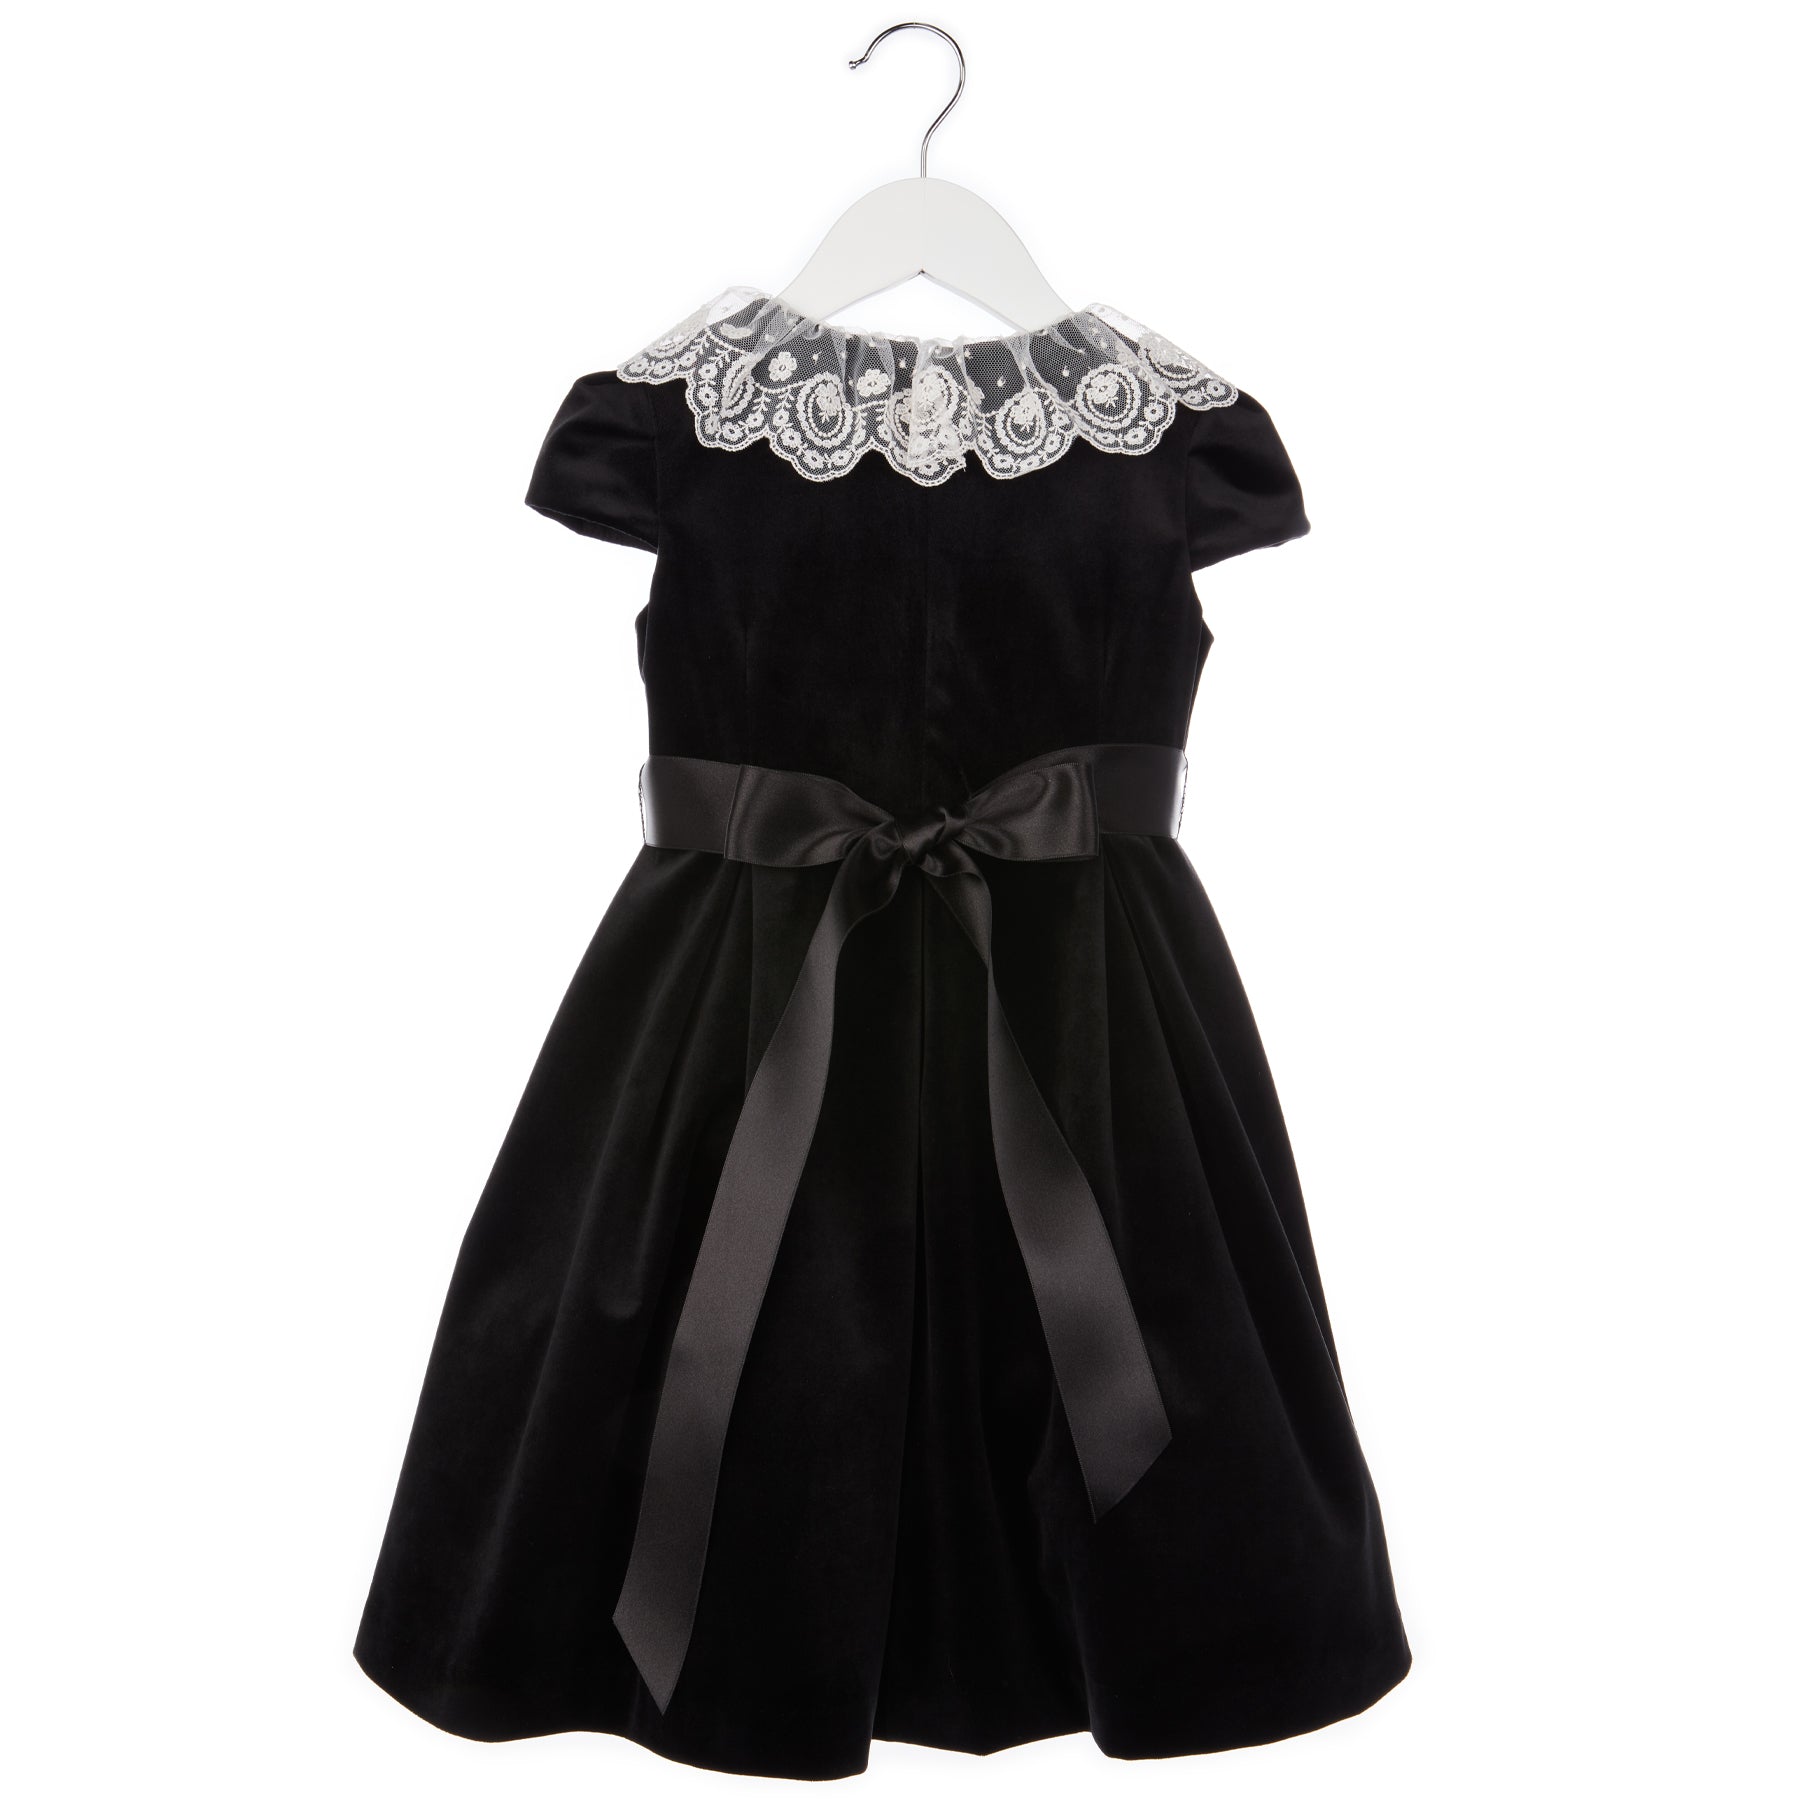 Black Deluxe Velvet Dress With Lace